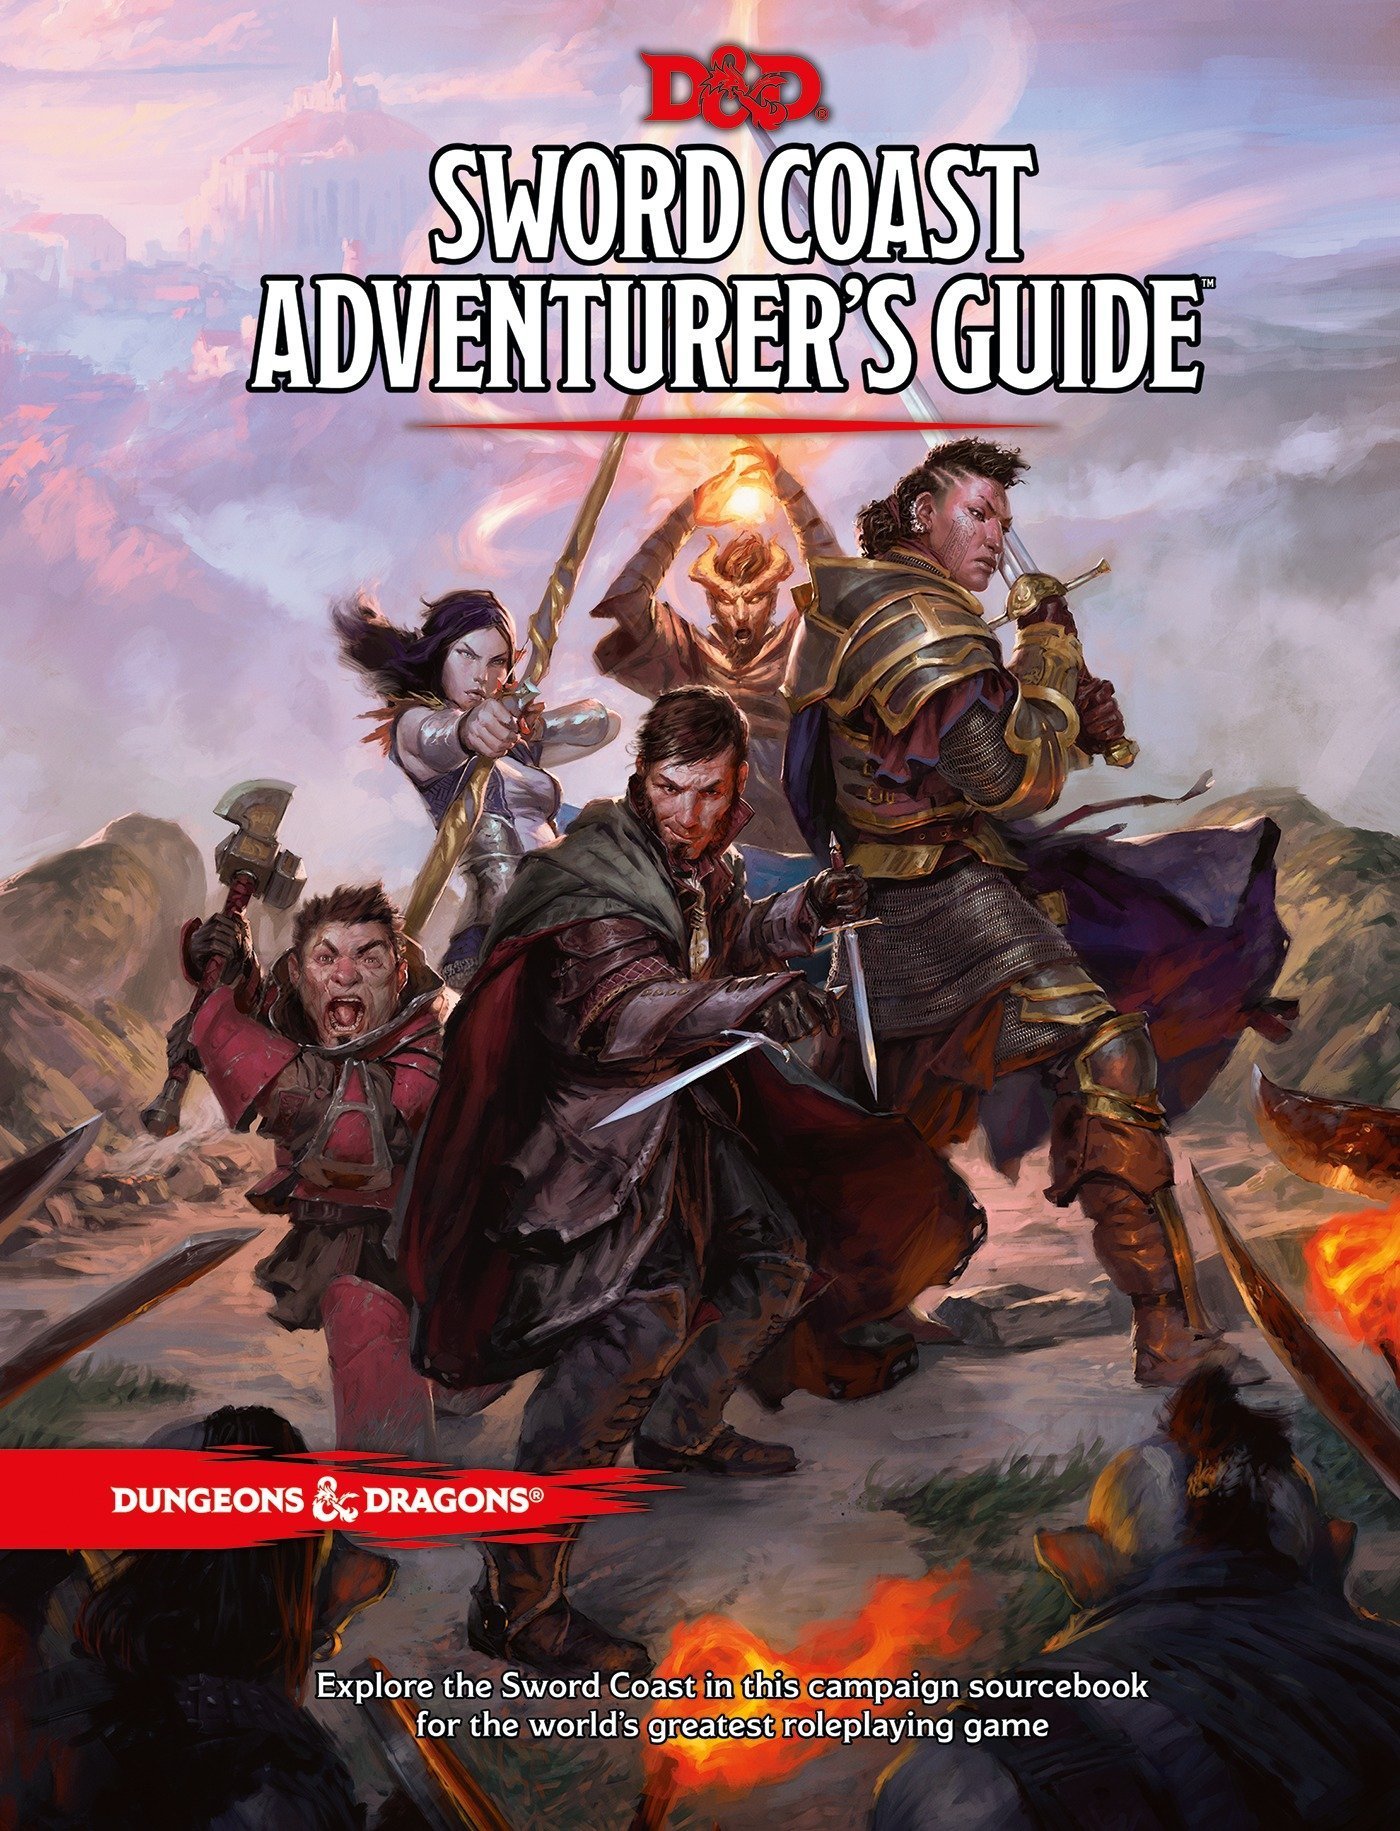 Dungeons & Dragons - Role Play - 5th Edition Sword Coast Adventurer